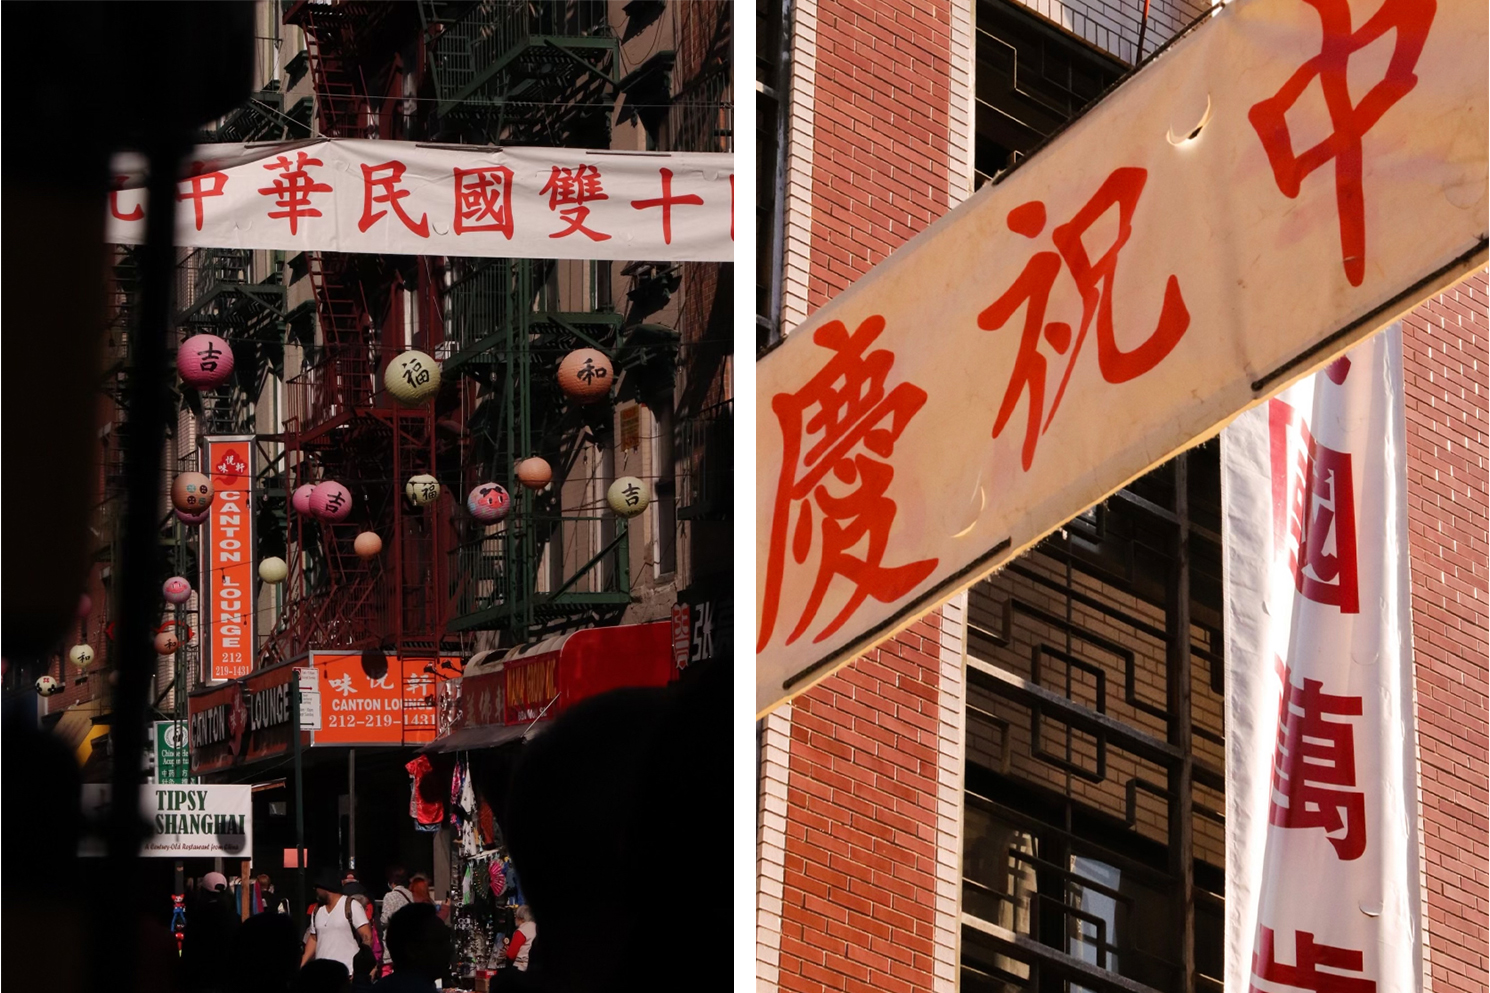 A collage of two photos: the one on the right is a banner that translates to “Republic of China Double Ten.” On the left is a banner that translates to “Celebration.”